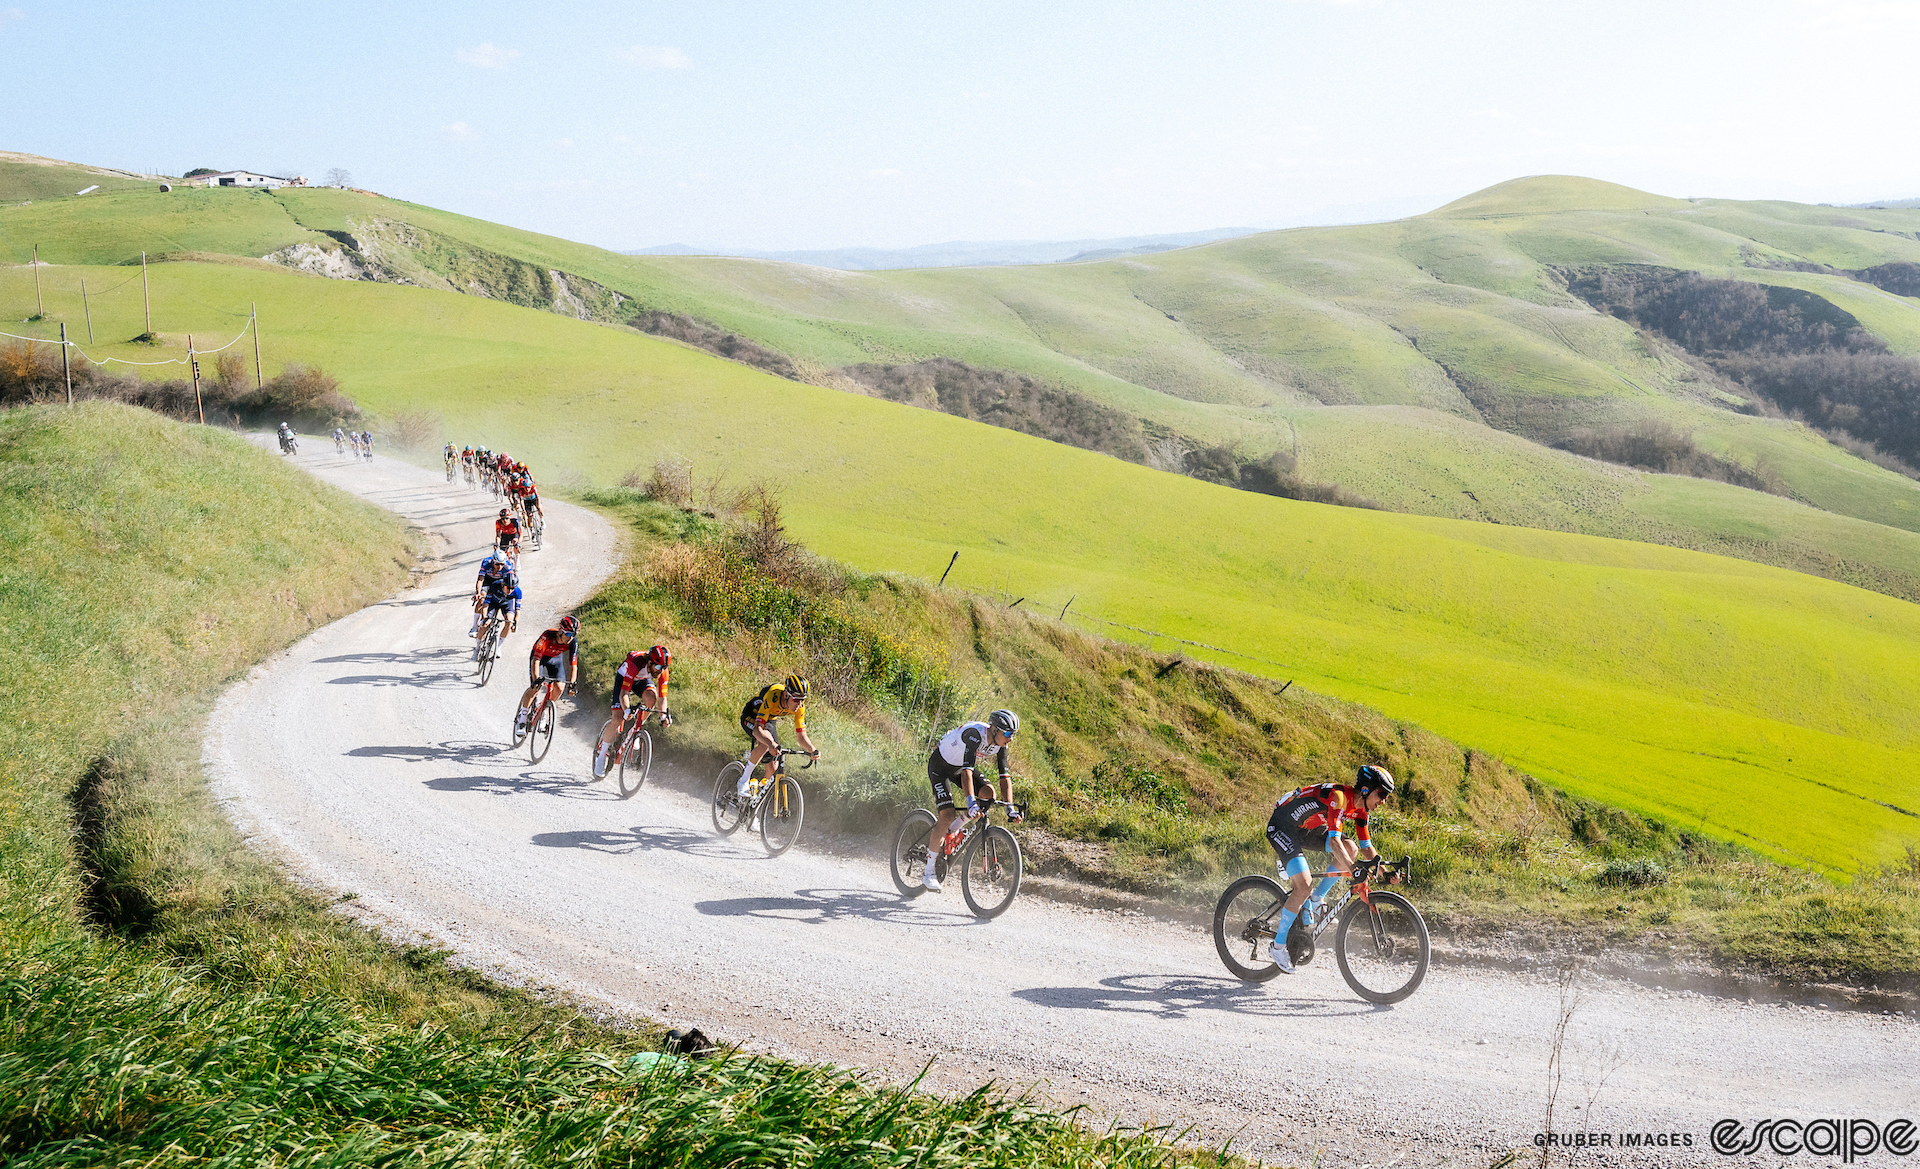 Riders negotiate a corner on one of Strade Bianche's gravel sectors. Dust rises from the line of riders as they sweep through turns amid green grassy fields and low hills.